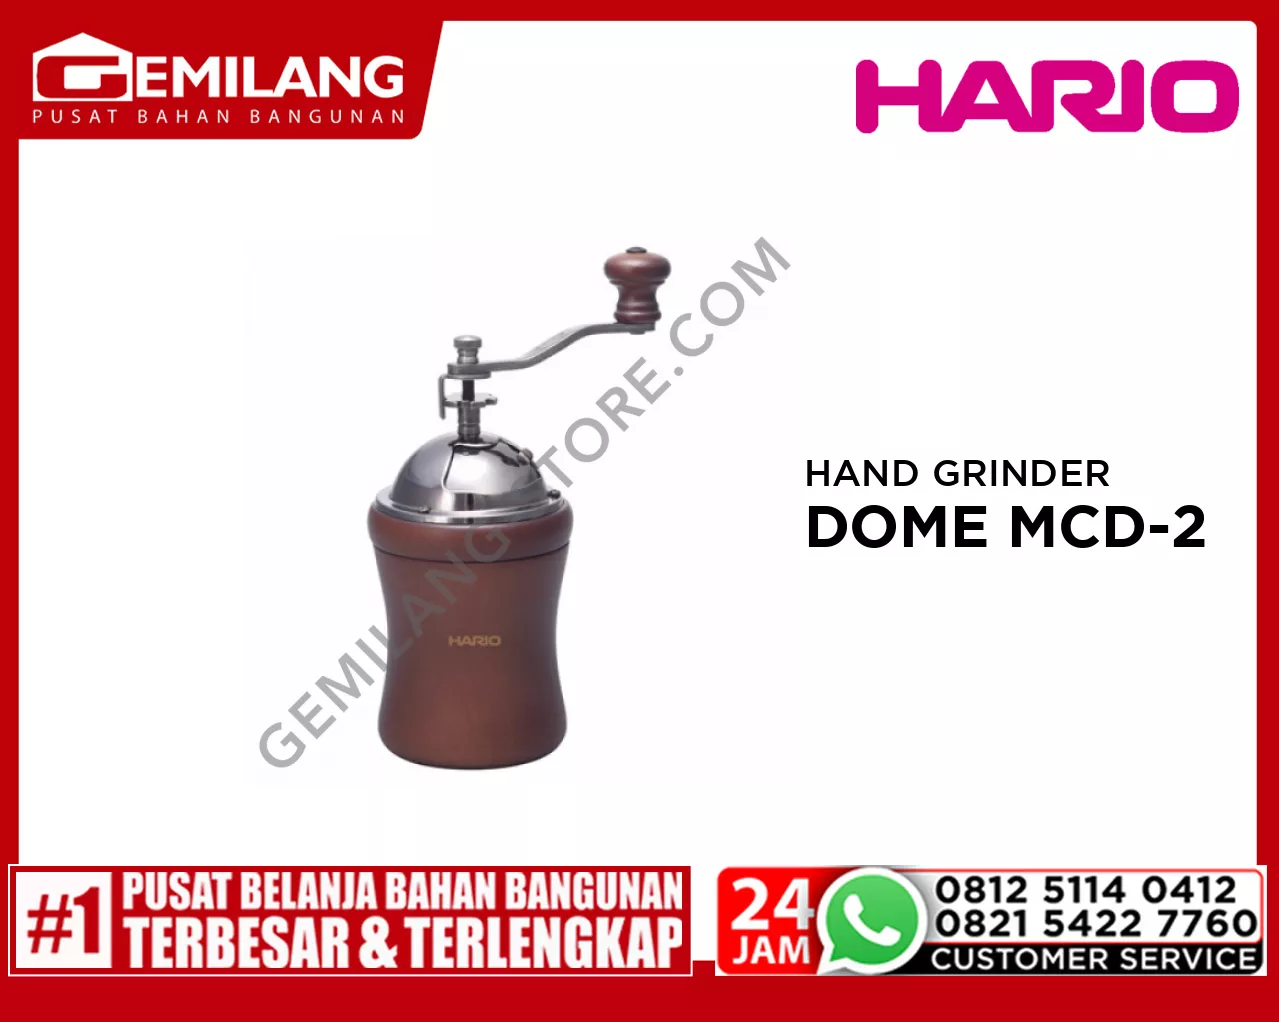 HARIO COFFEE MILL HAND GRINDER DOME MCD-2